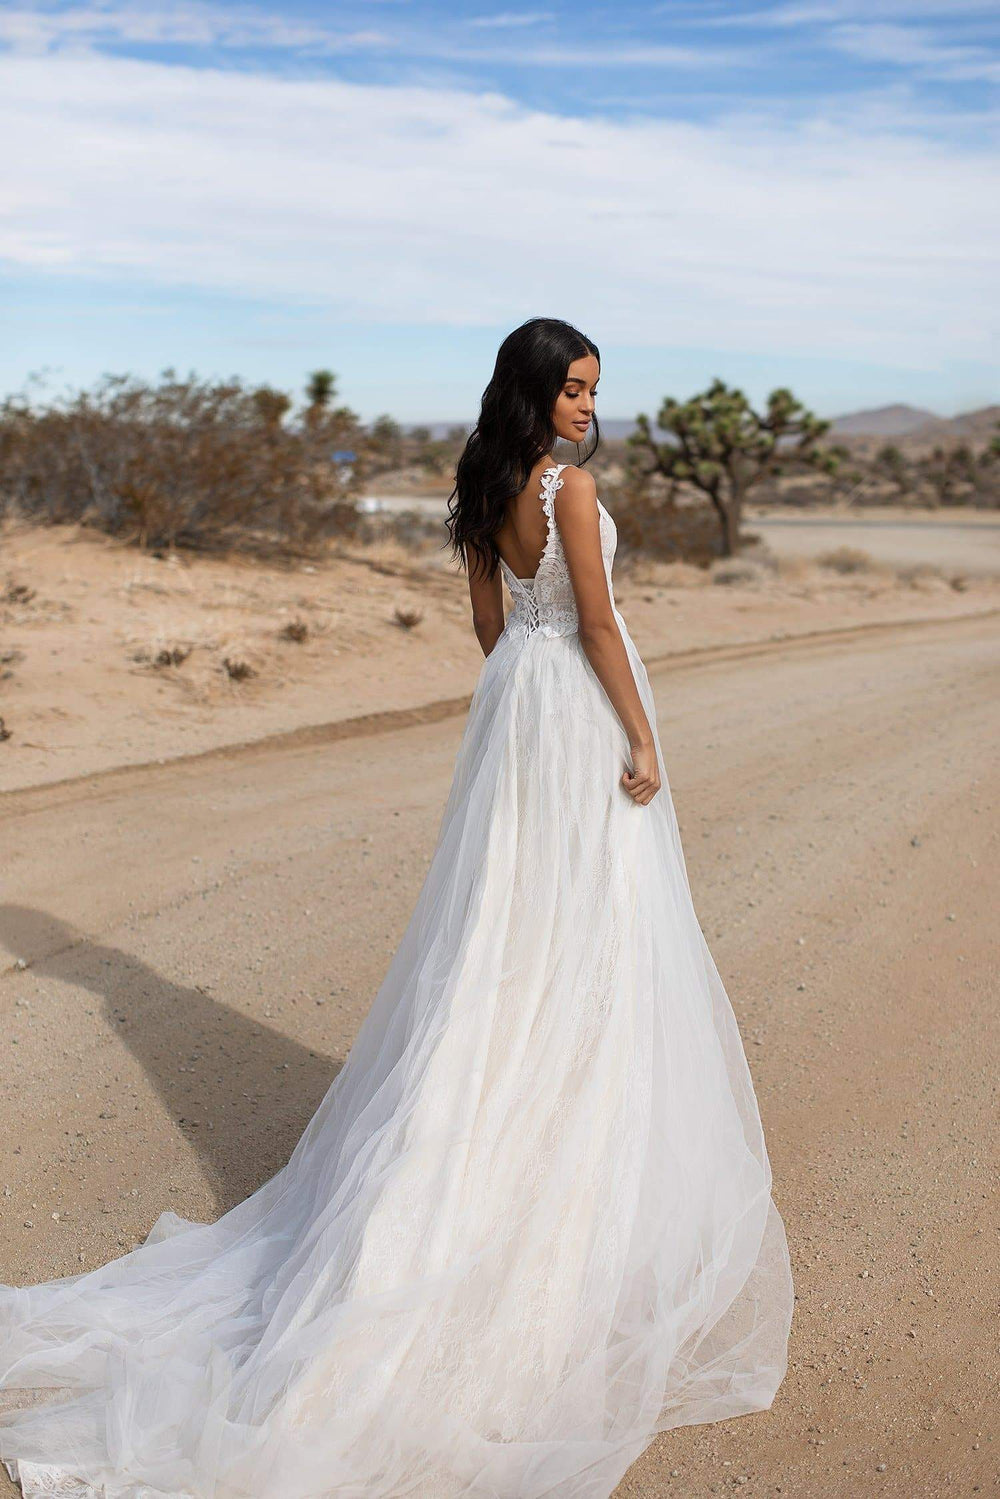 A&N Gaia - White Boho Bridal Gown with Lace Bodice & Tulle Skirt